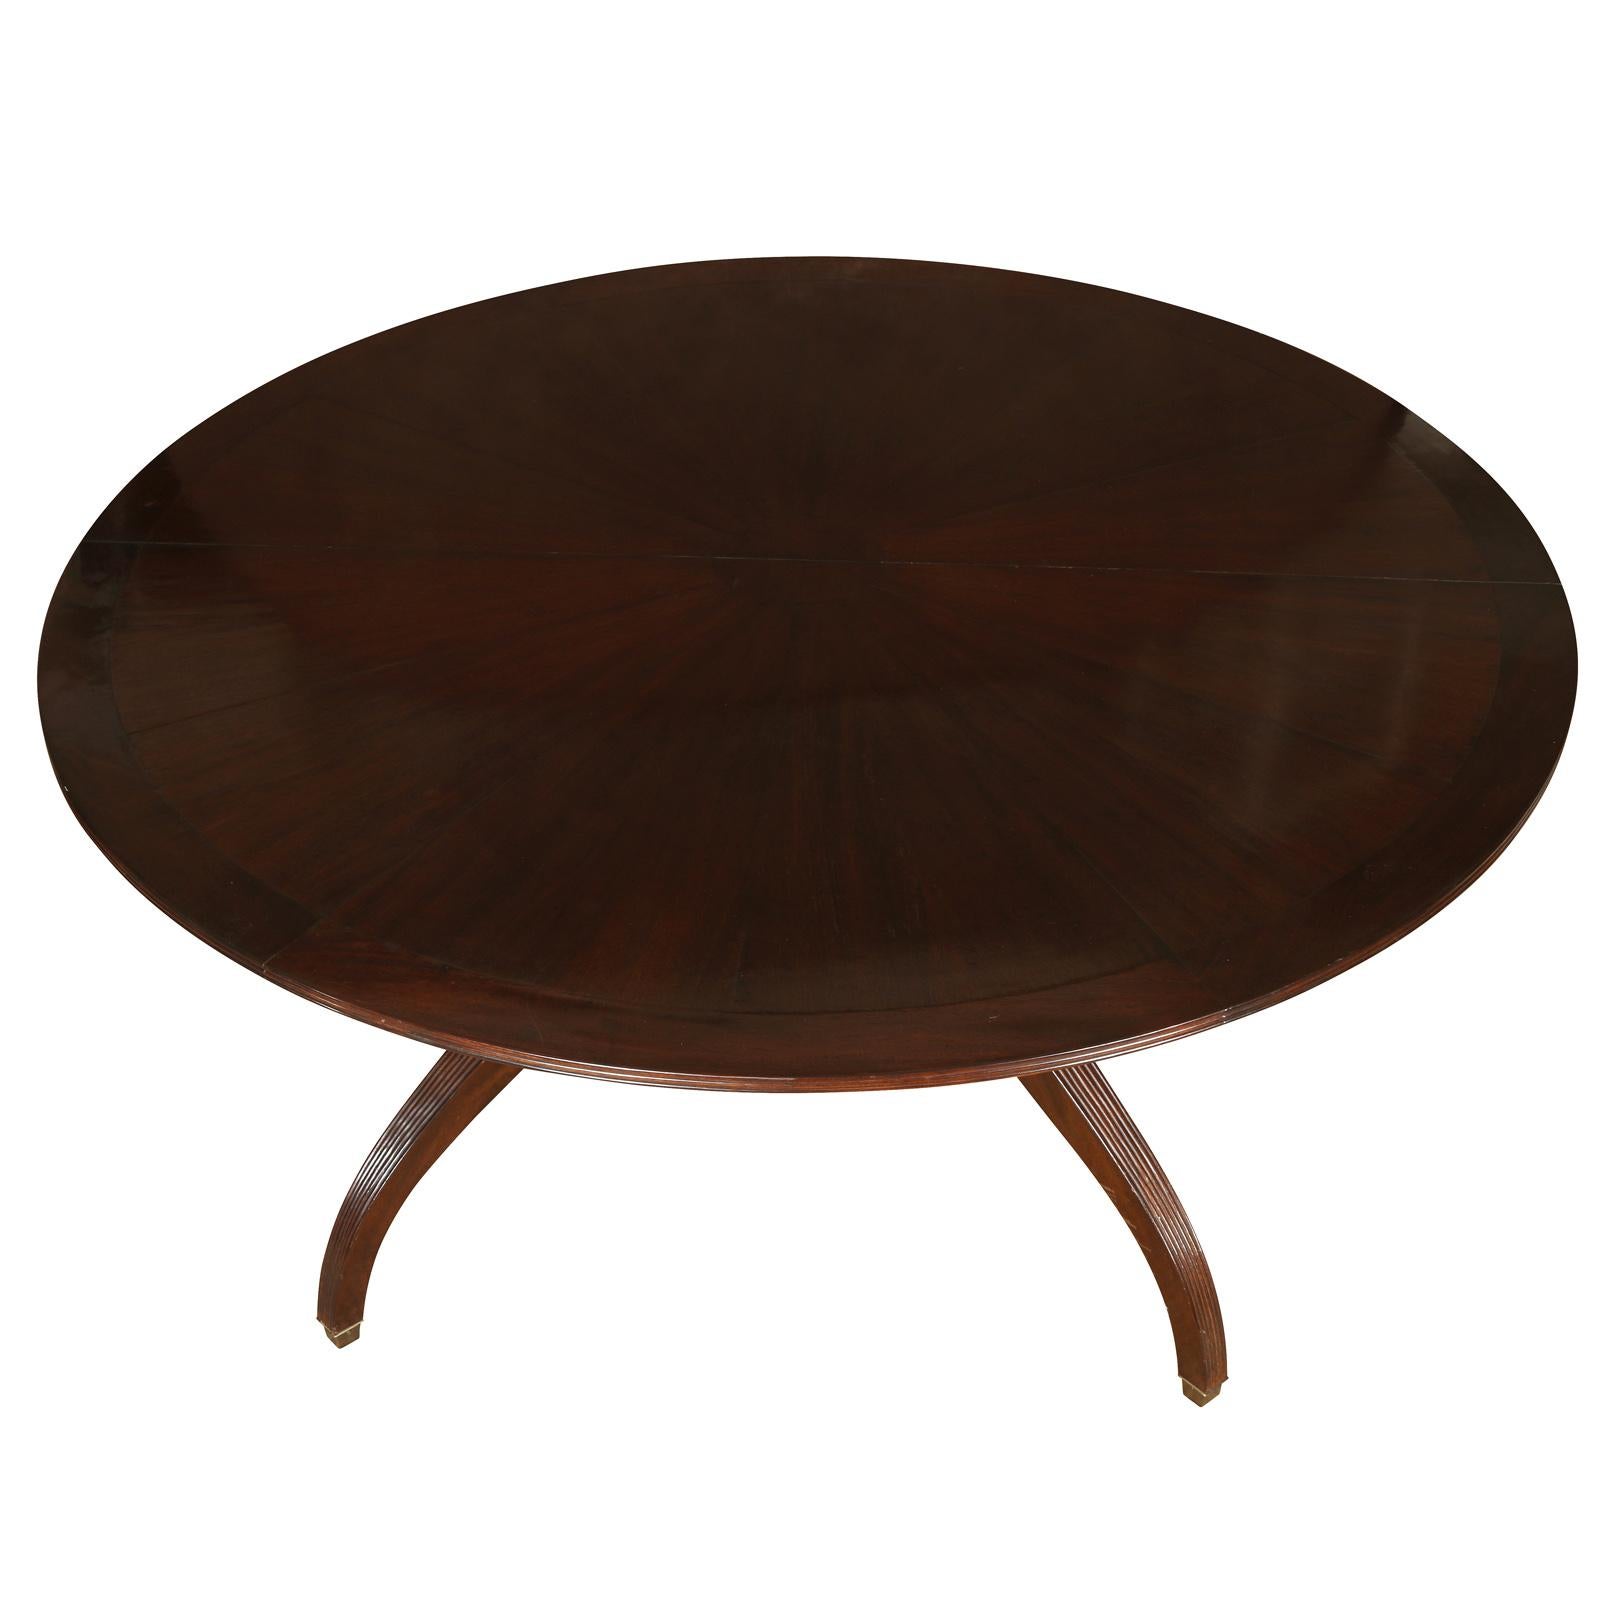 A custom mahogany round dining table with a pedestal base in Regency style. Table can open to 111